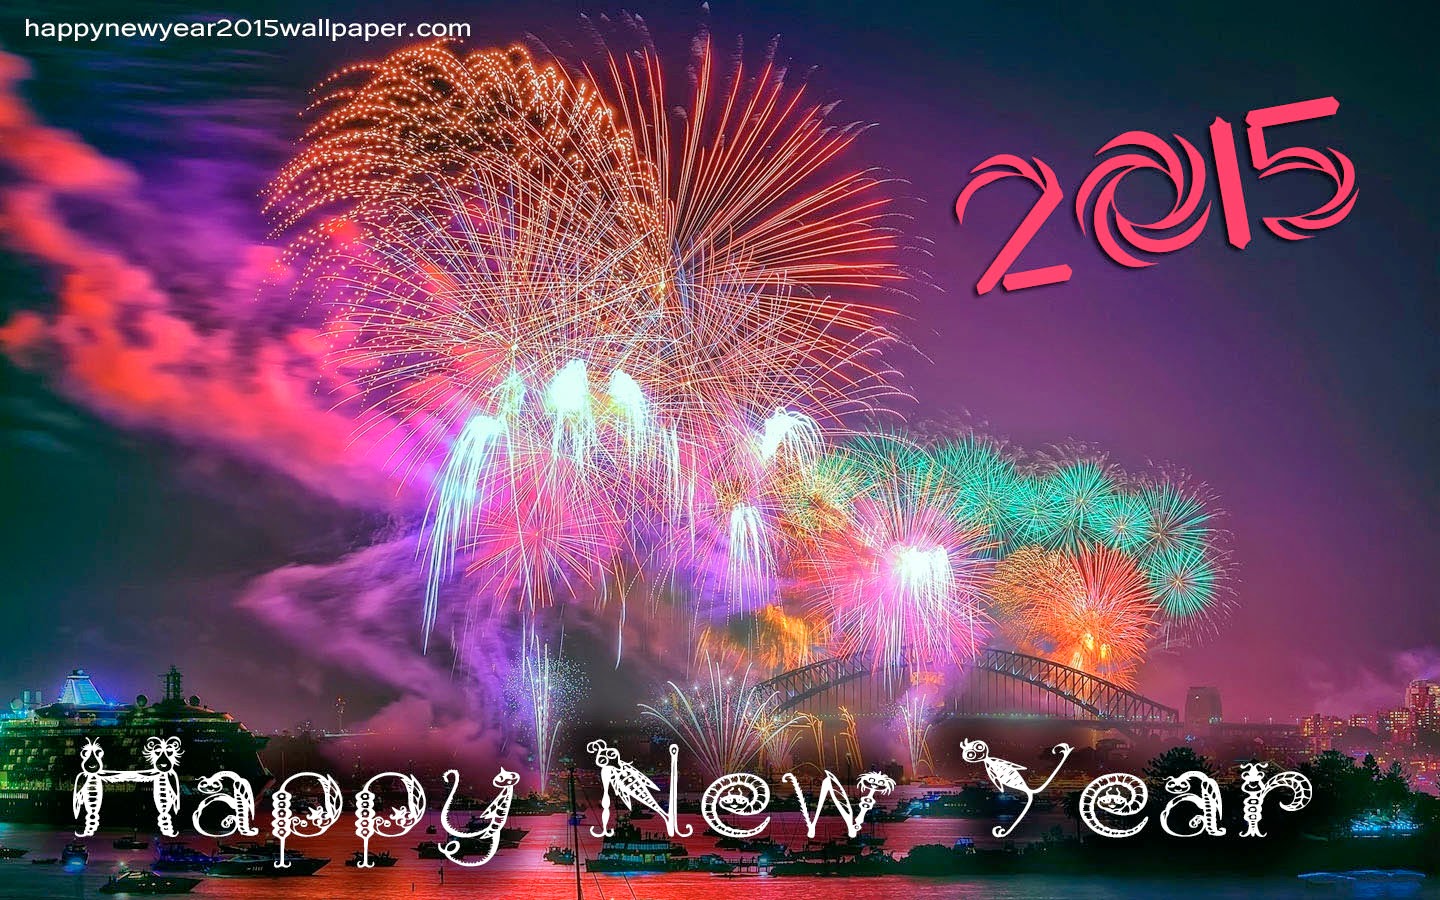 Happy New Year Fireworks Image Wallpaper